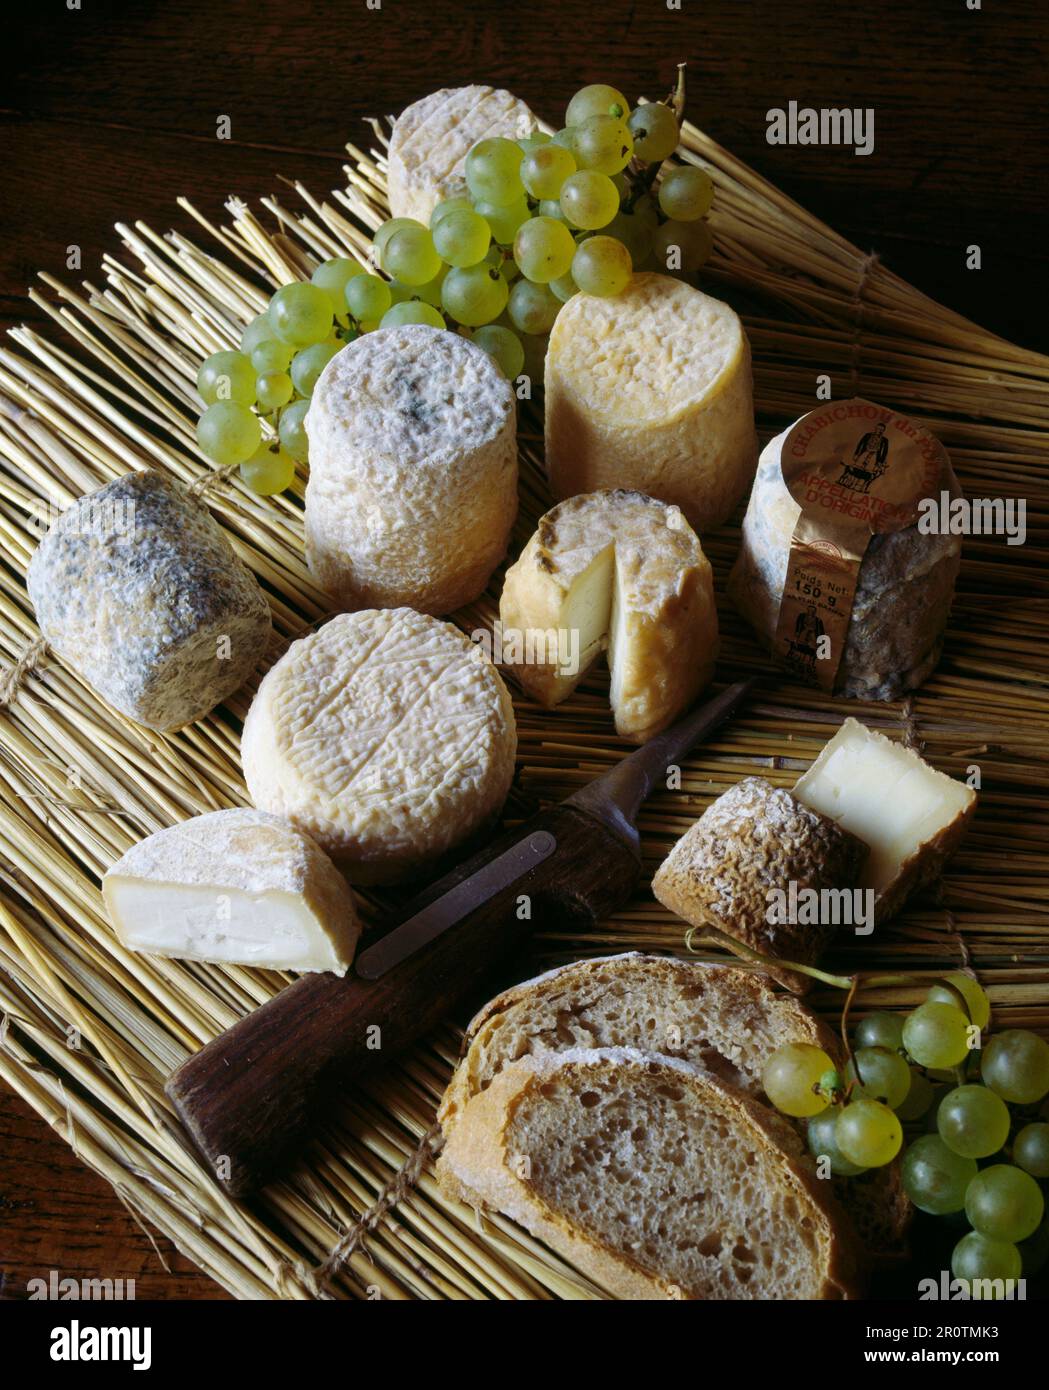 selection of goat cheeses Stock Photo